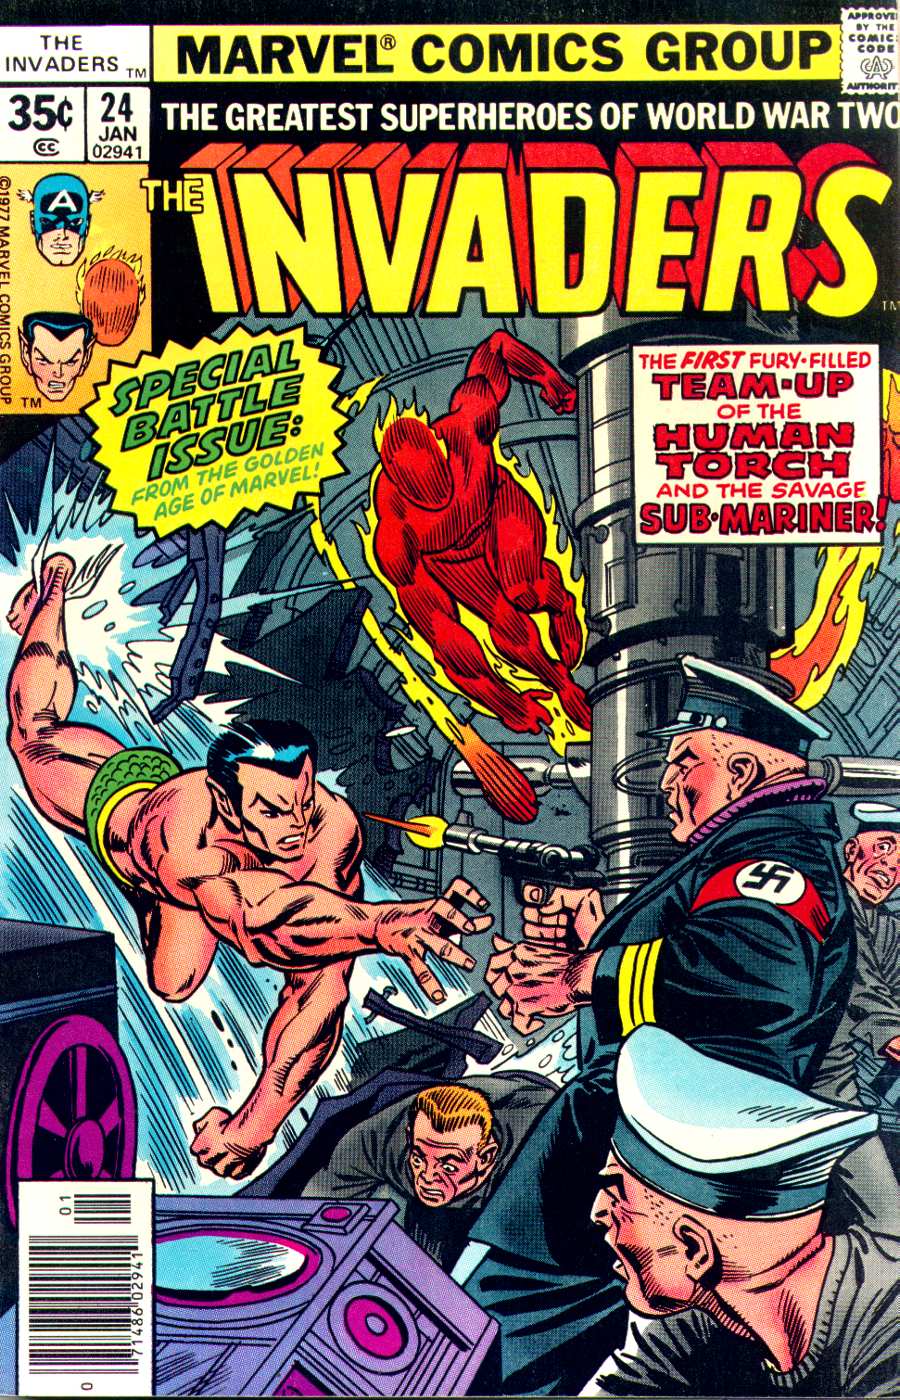 Invaders #7 1st Baron Blood and Union Jack!  Comic Books - Bronze Age,  Marvel, Human Torch / HipComic